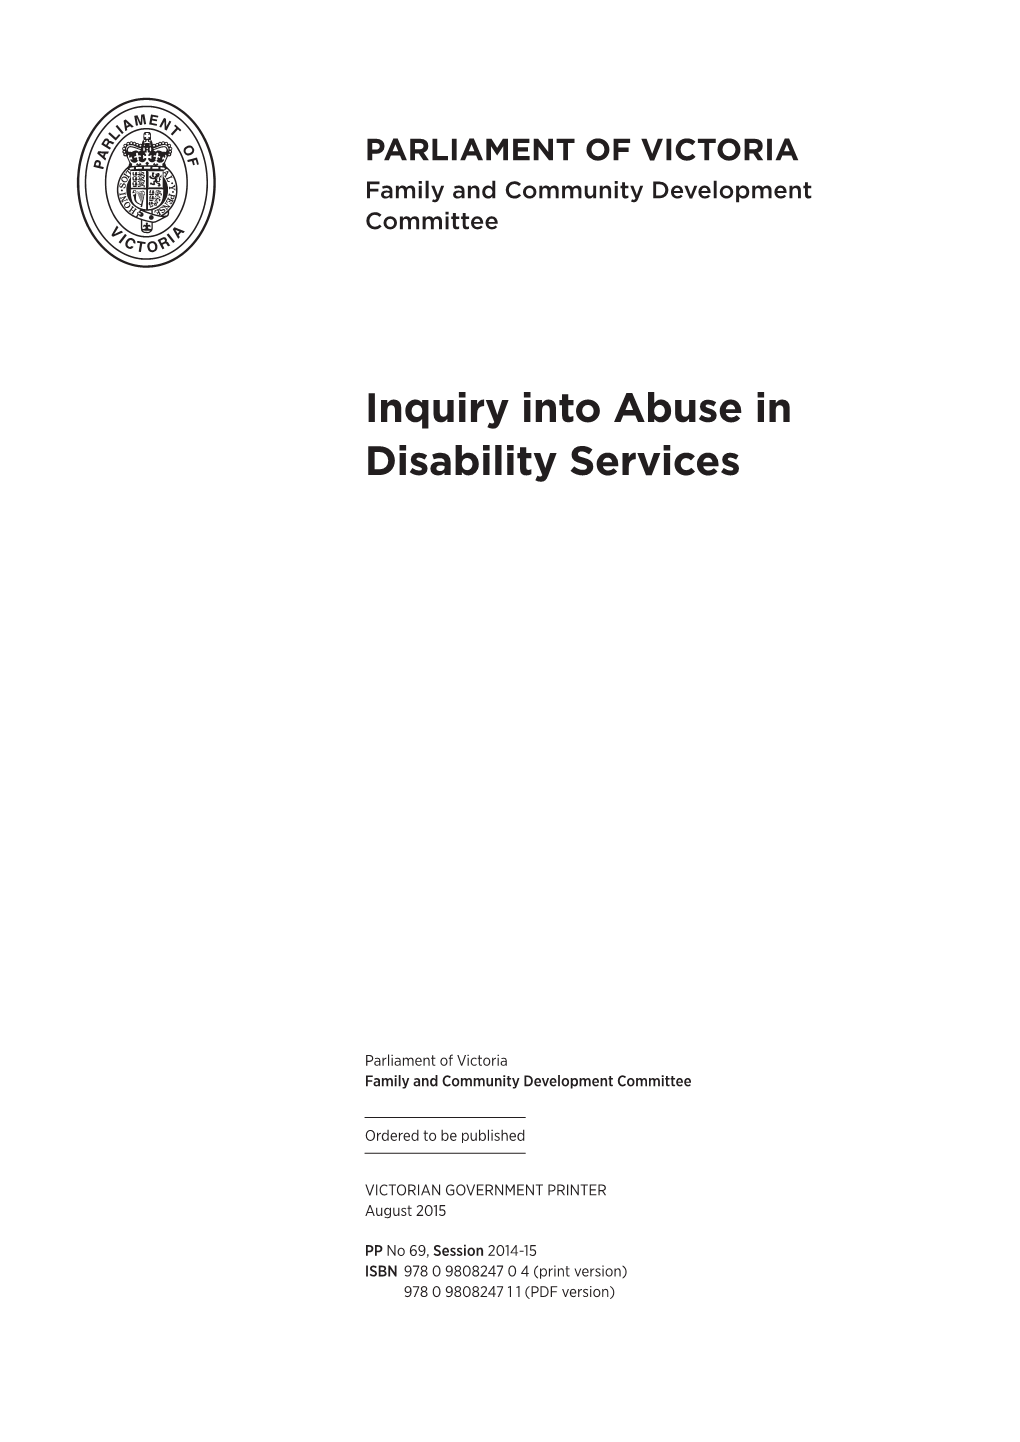 Inquiry Into Abuse in Disability Services